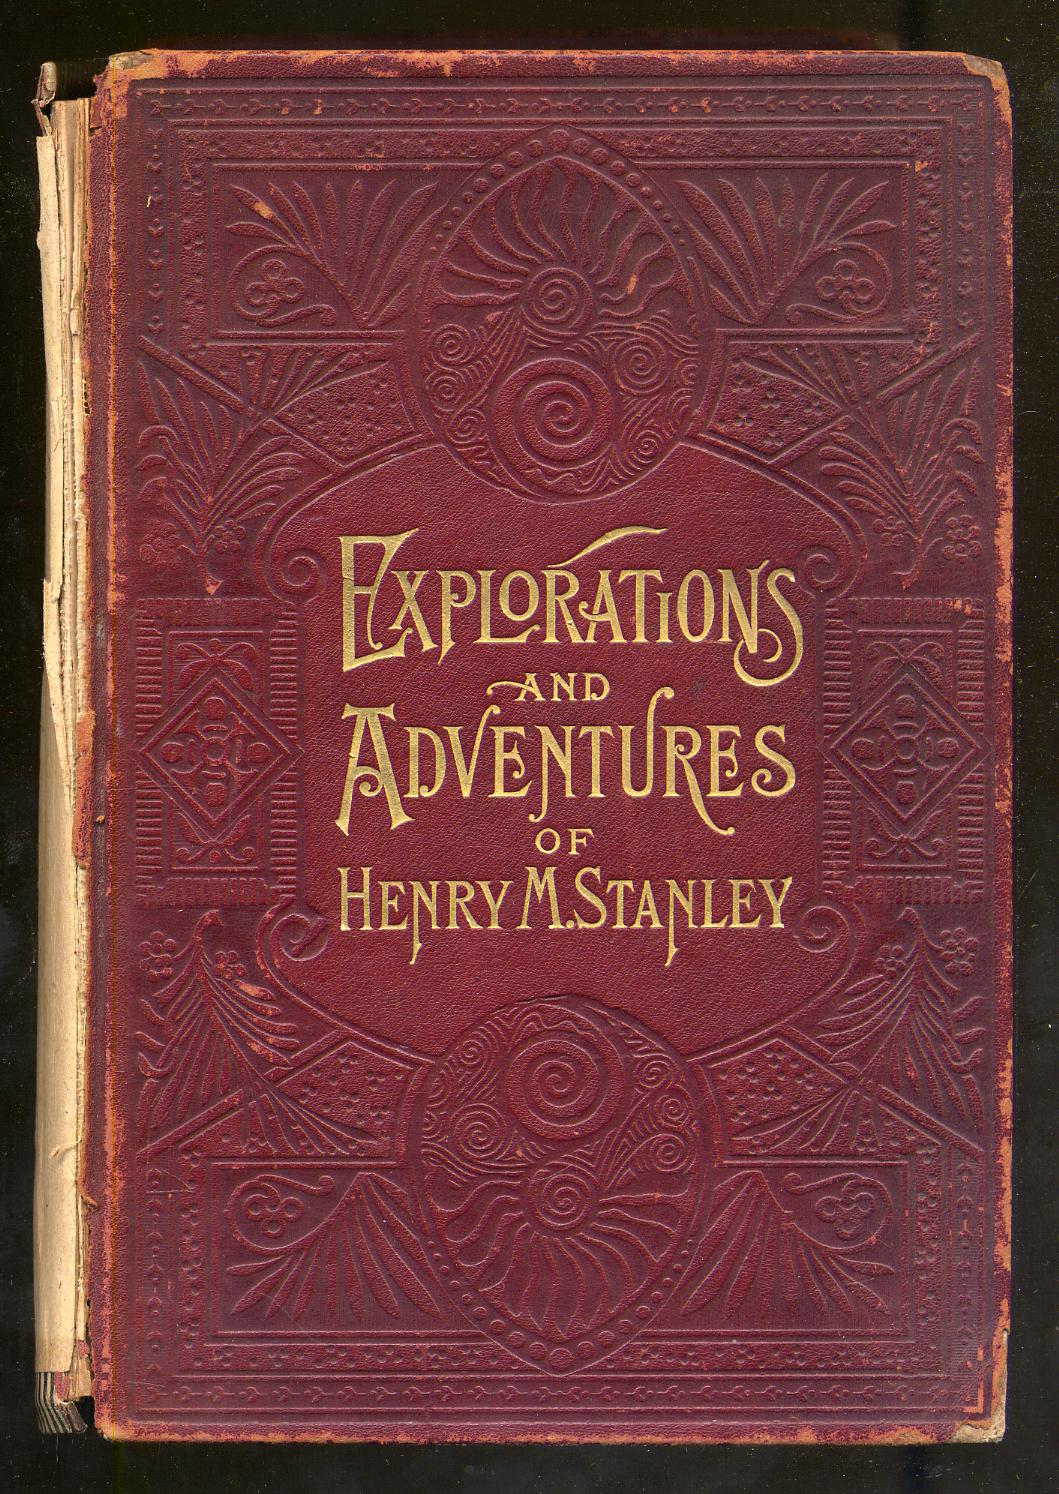 Wonders of the Tropics or Explorations and Adventures of Henry M